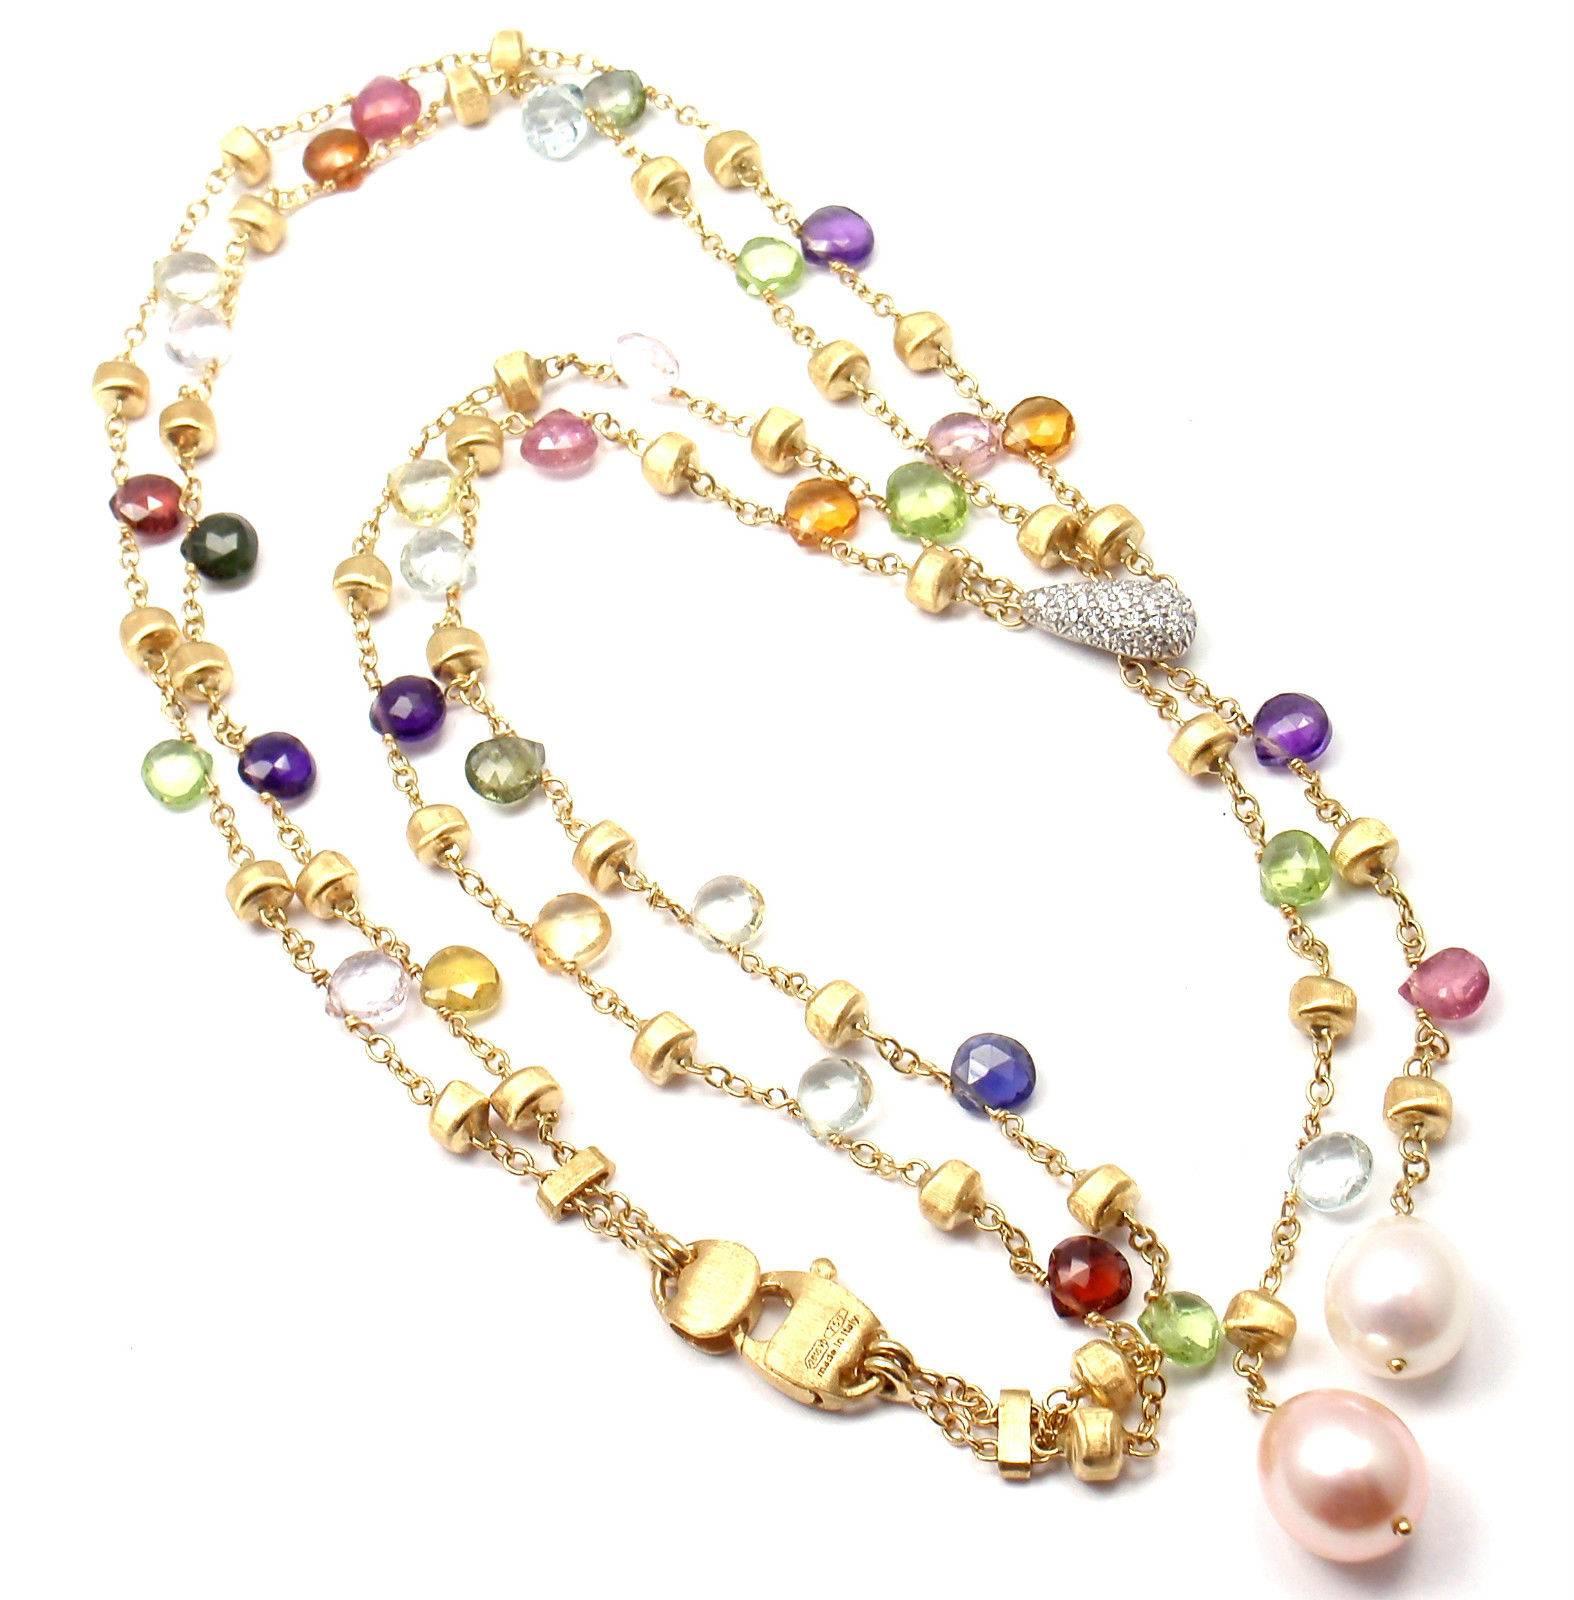 18k Yellow Gold Paradise Multicolor Gemstone Diamond Lariat Necklace by Marco Bicego.  
With Round brilliant cut diamonds total weigh approx. .30ct
Mixed semi-precious colored stone
2 cultured pearls 9mm x 10mm
This necklace is in mint condition